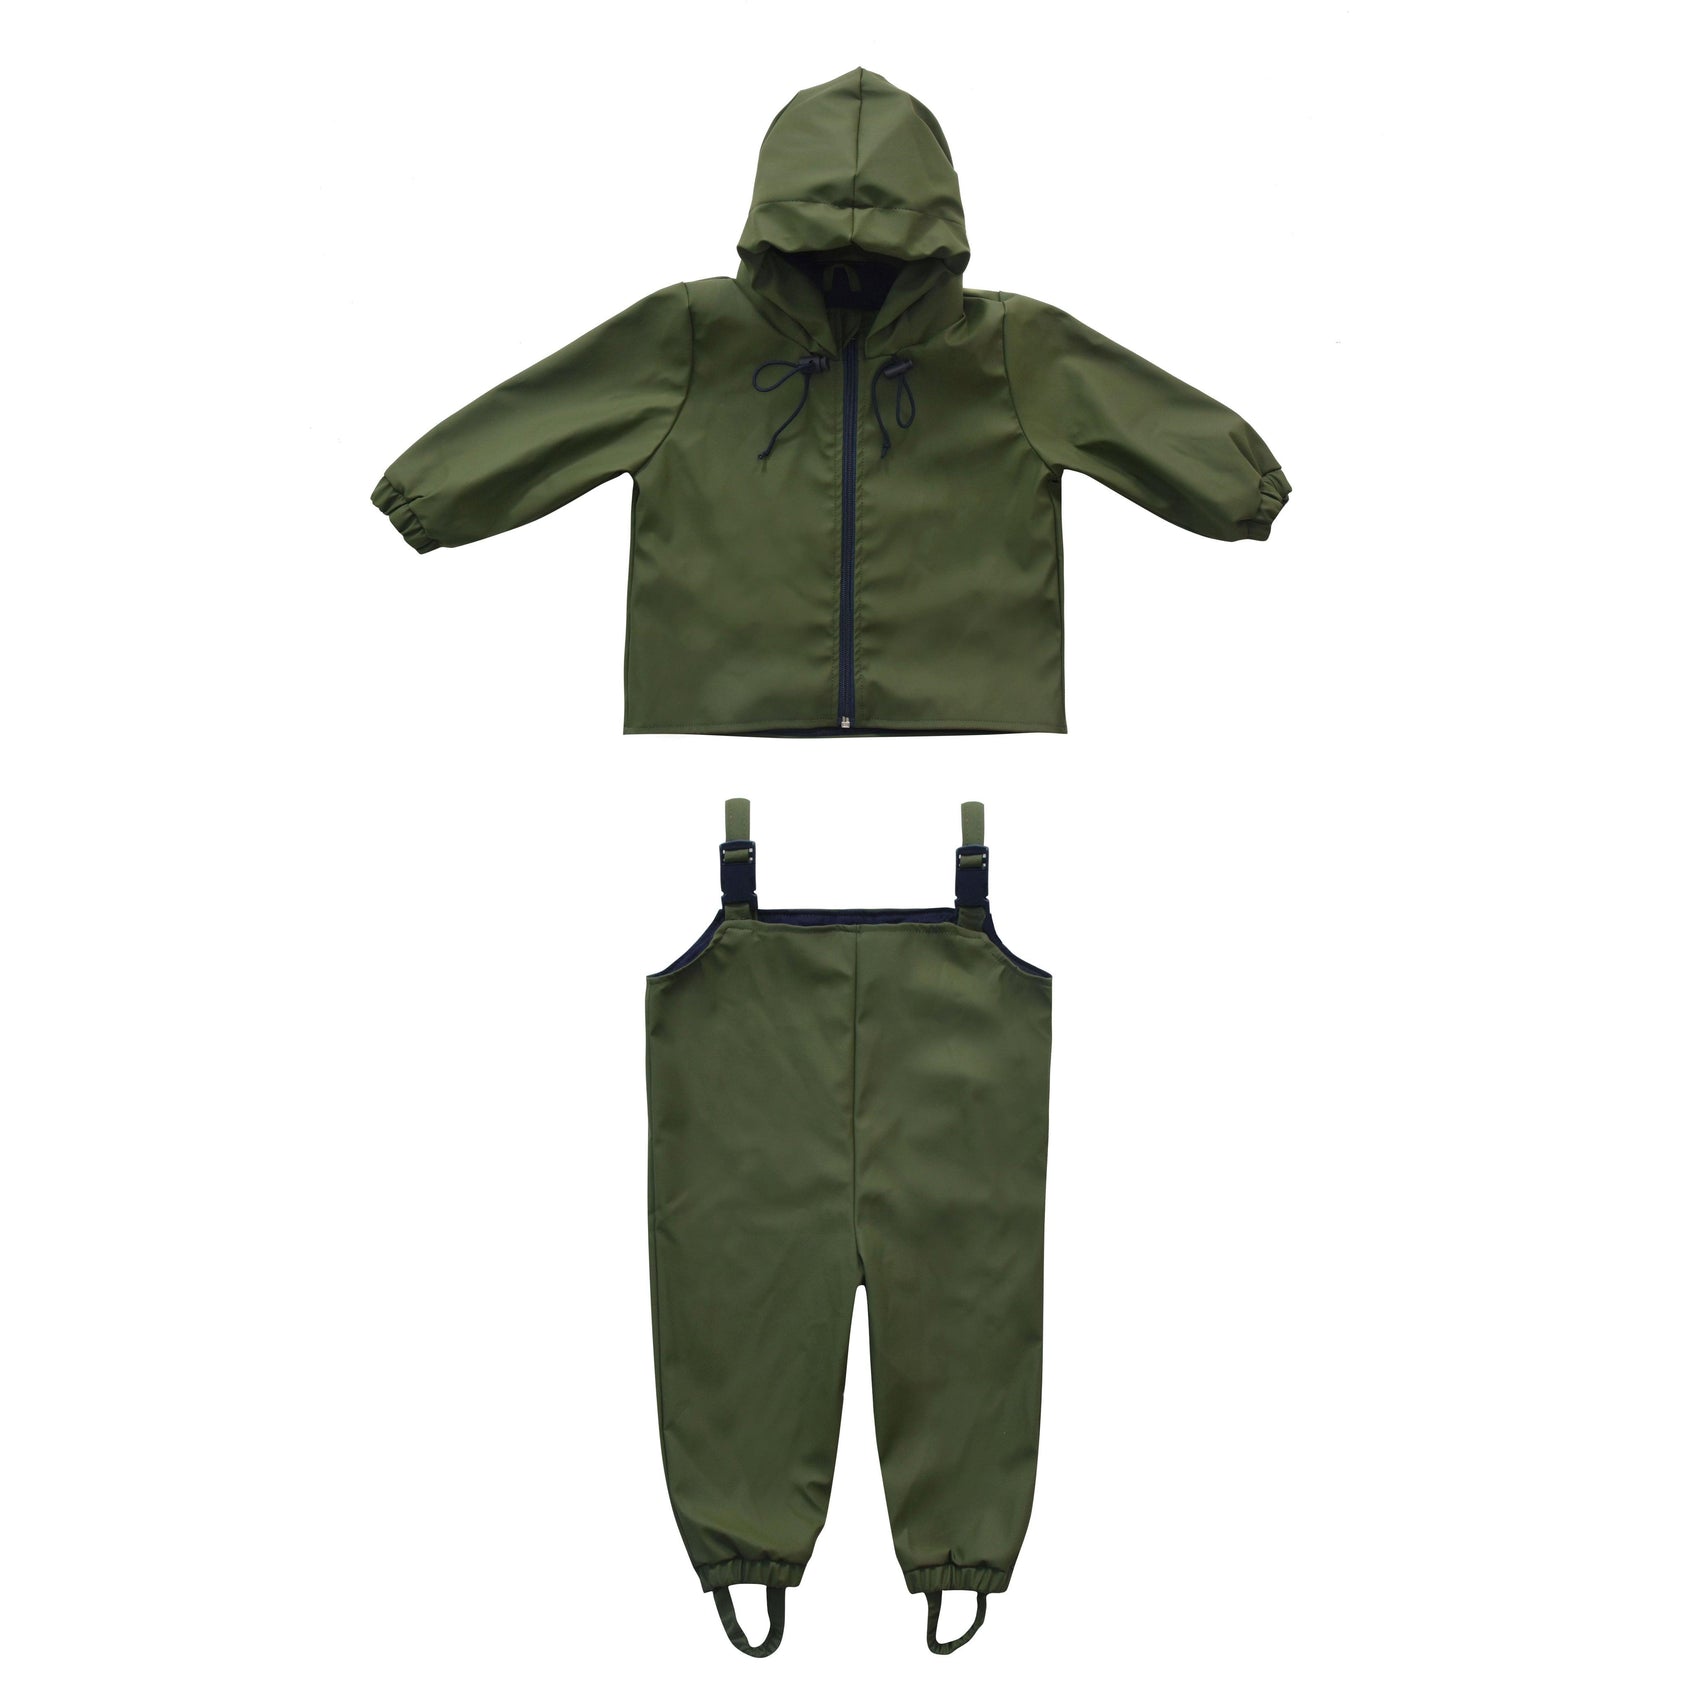 Green waterproof hooded rain jacket and matching rain pants set by MellowConceptStore isolated on a white background.